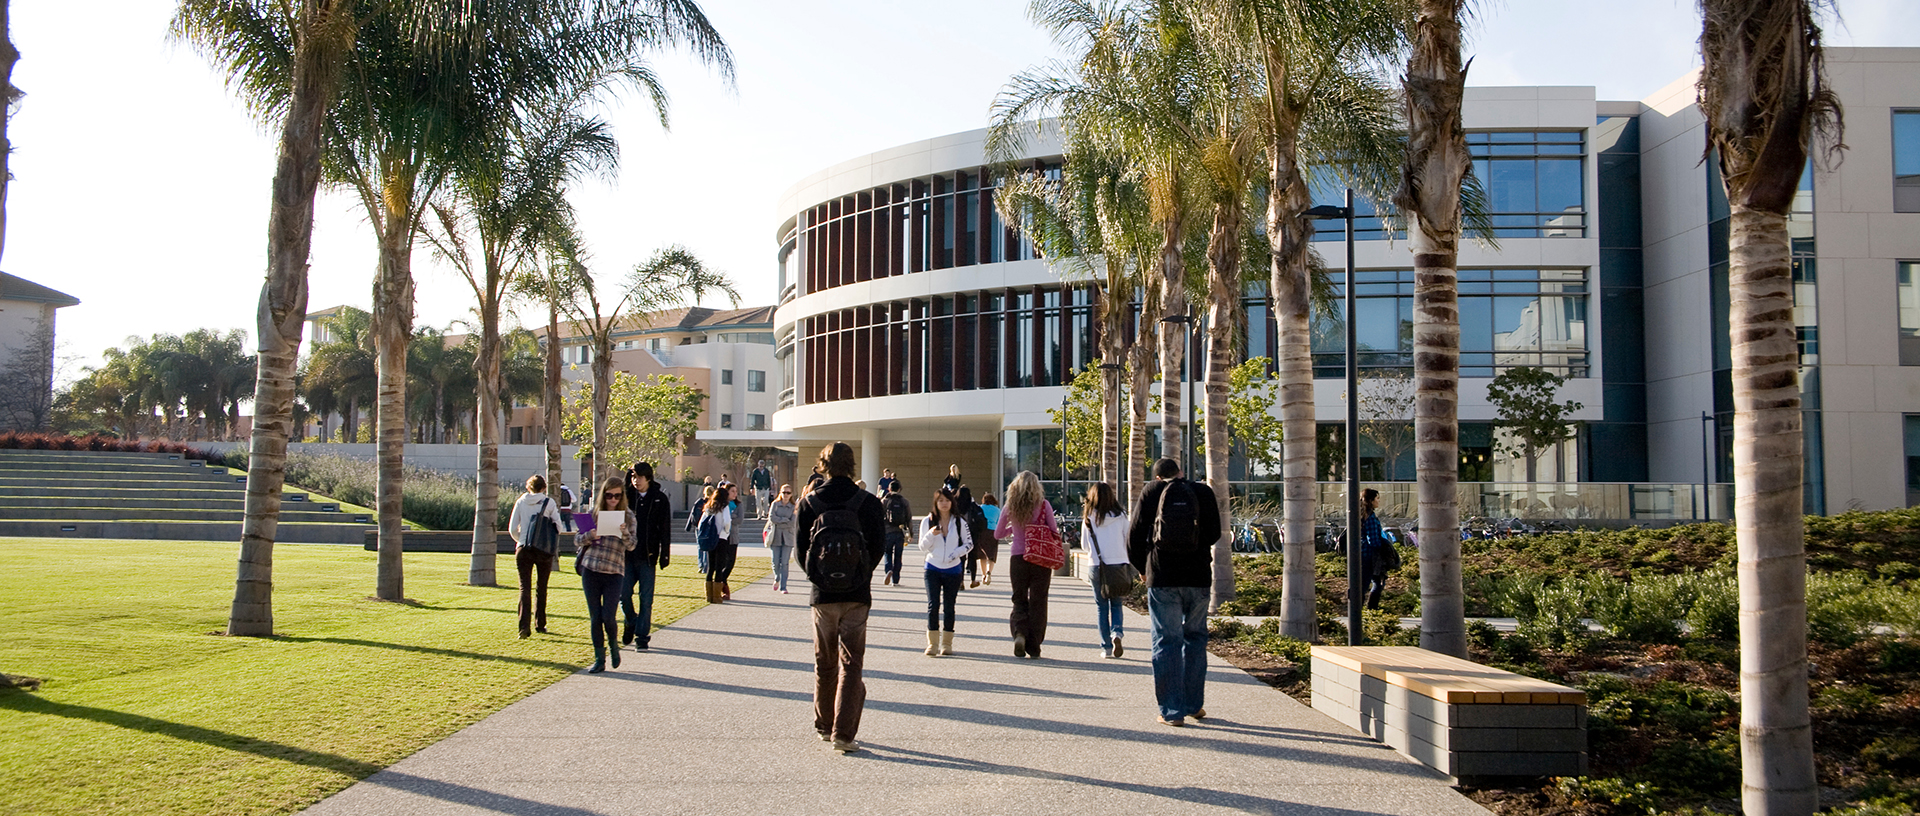 Students walking down a palm-lined walkway in front of Hannon library.